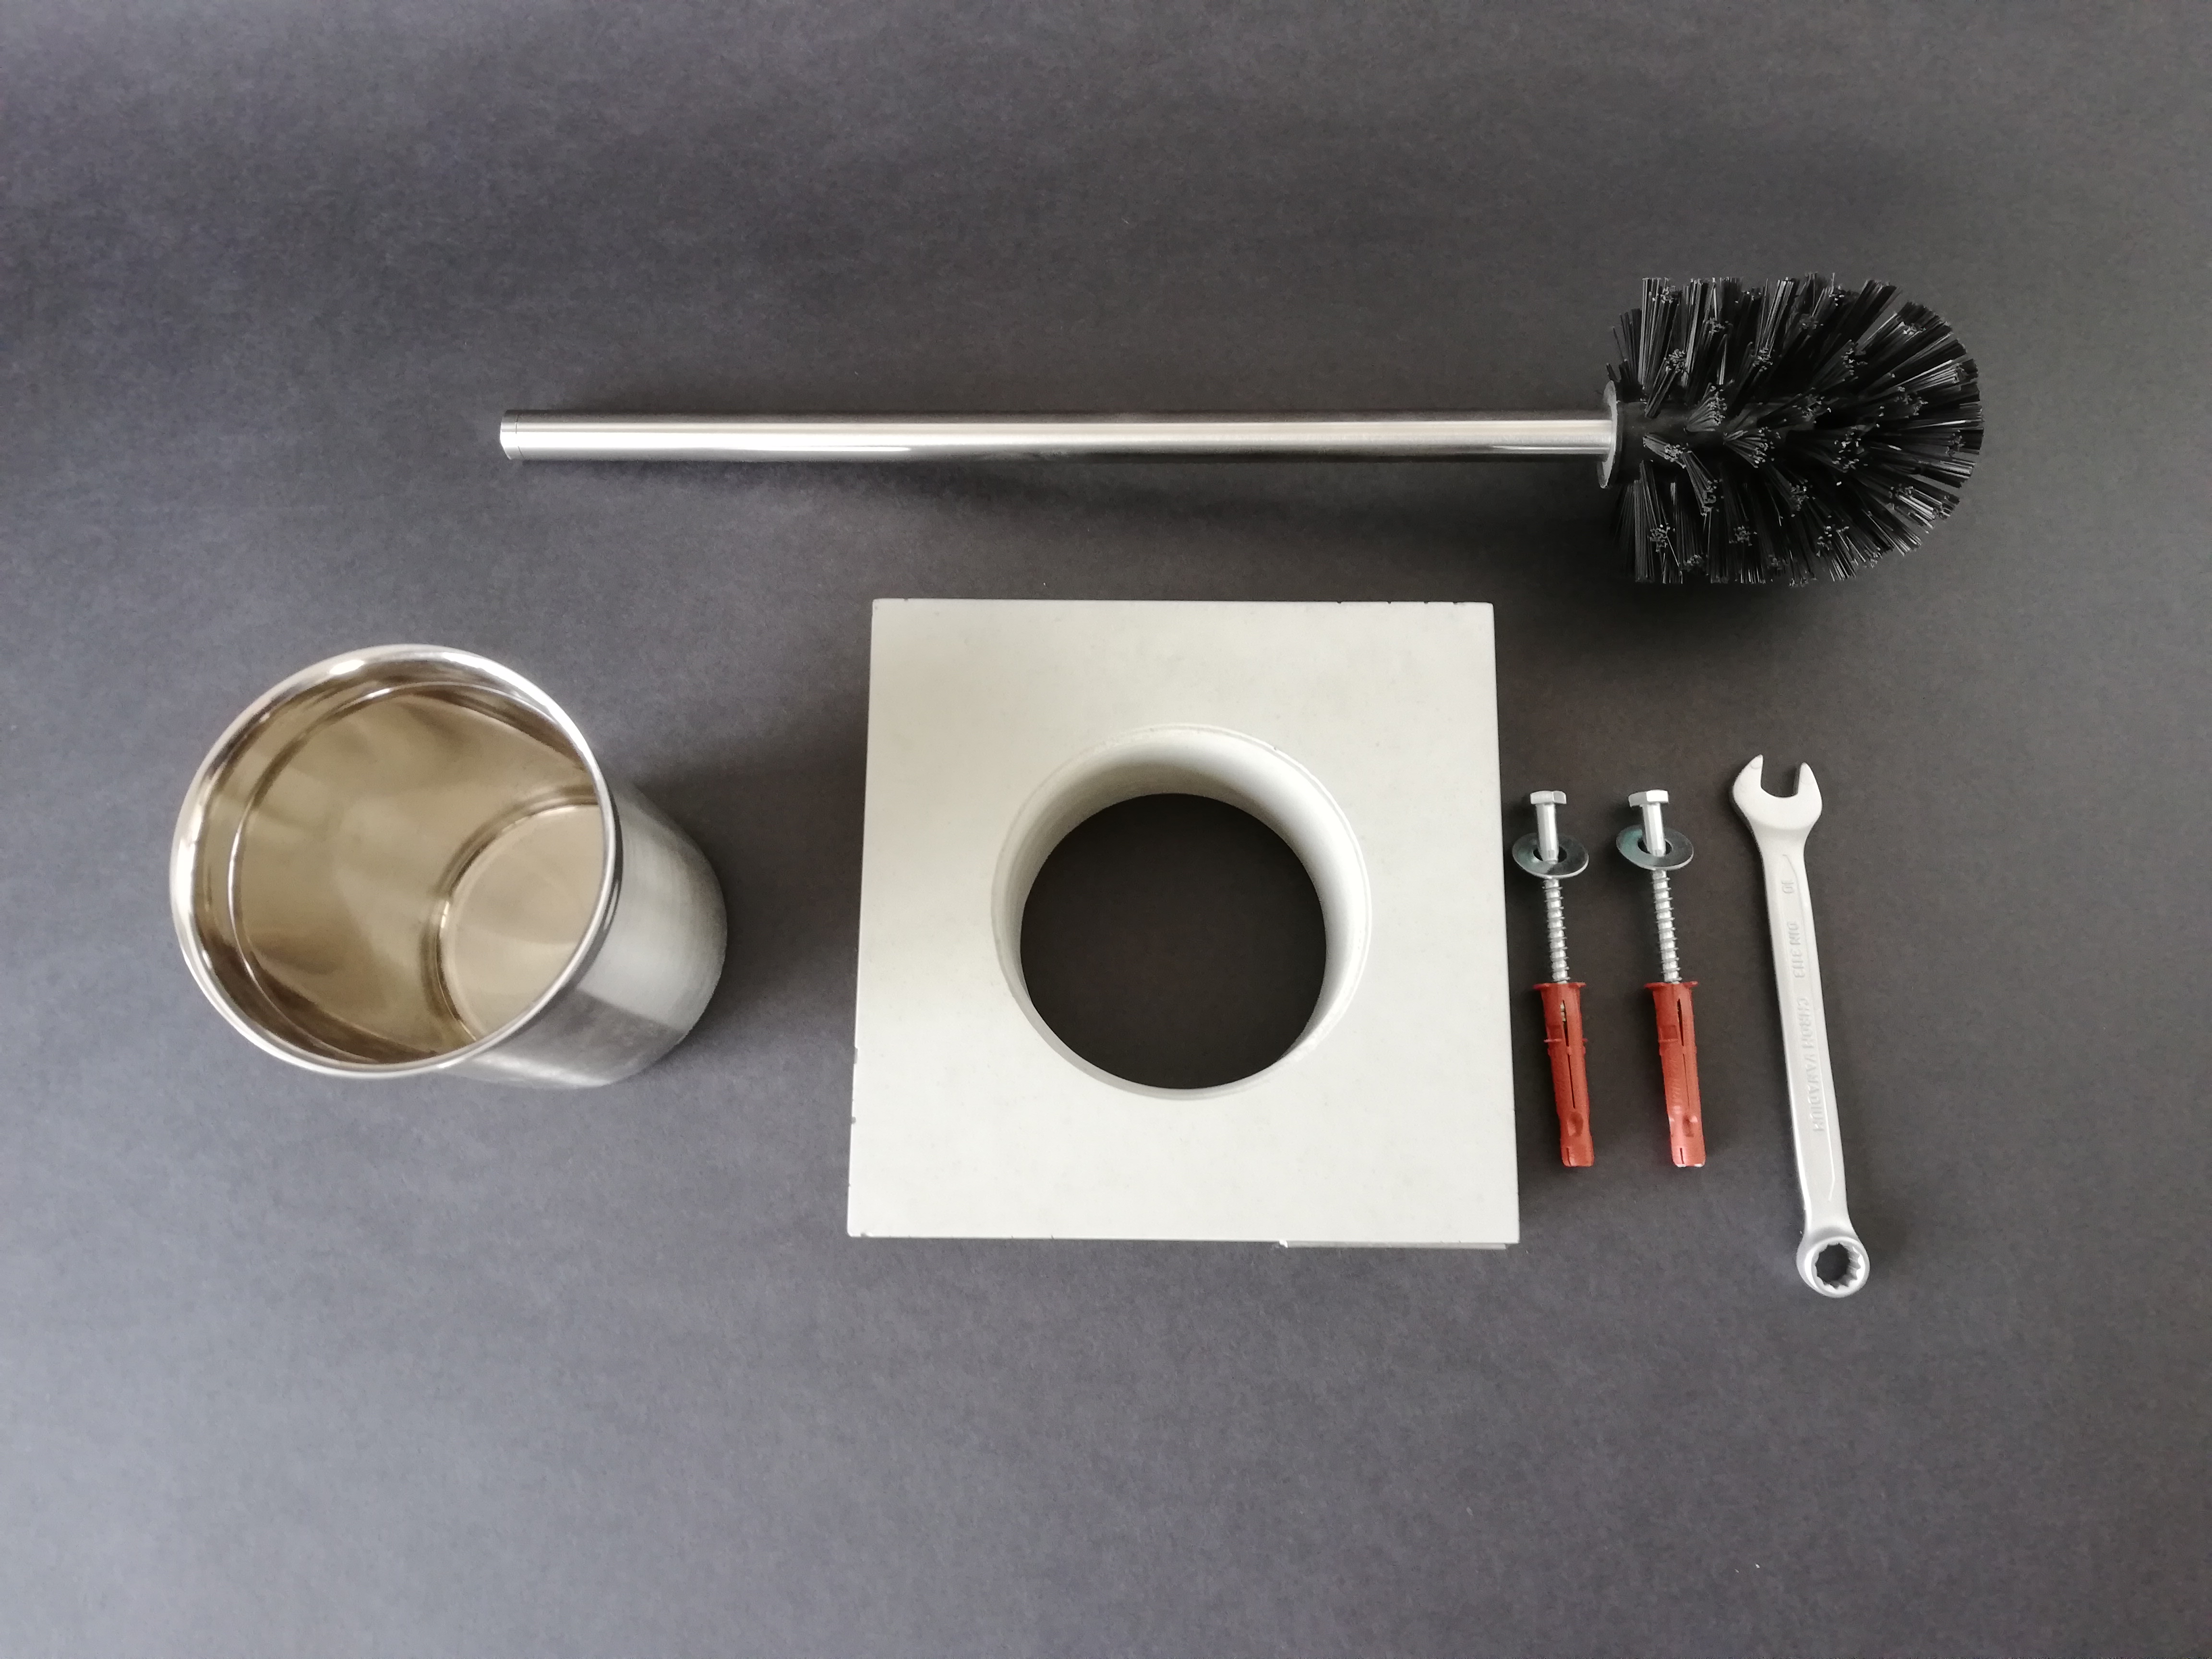 modern Toilet Brush Holder, grey concrete - delivery with mounting tools for wall fitting